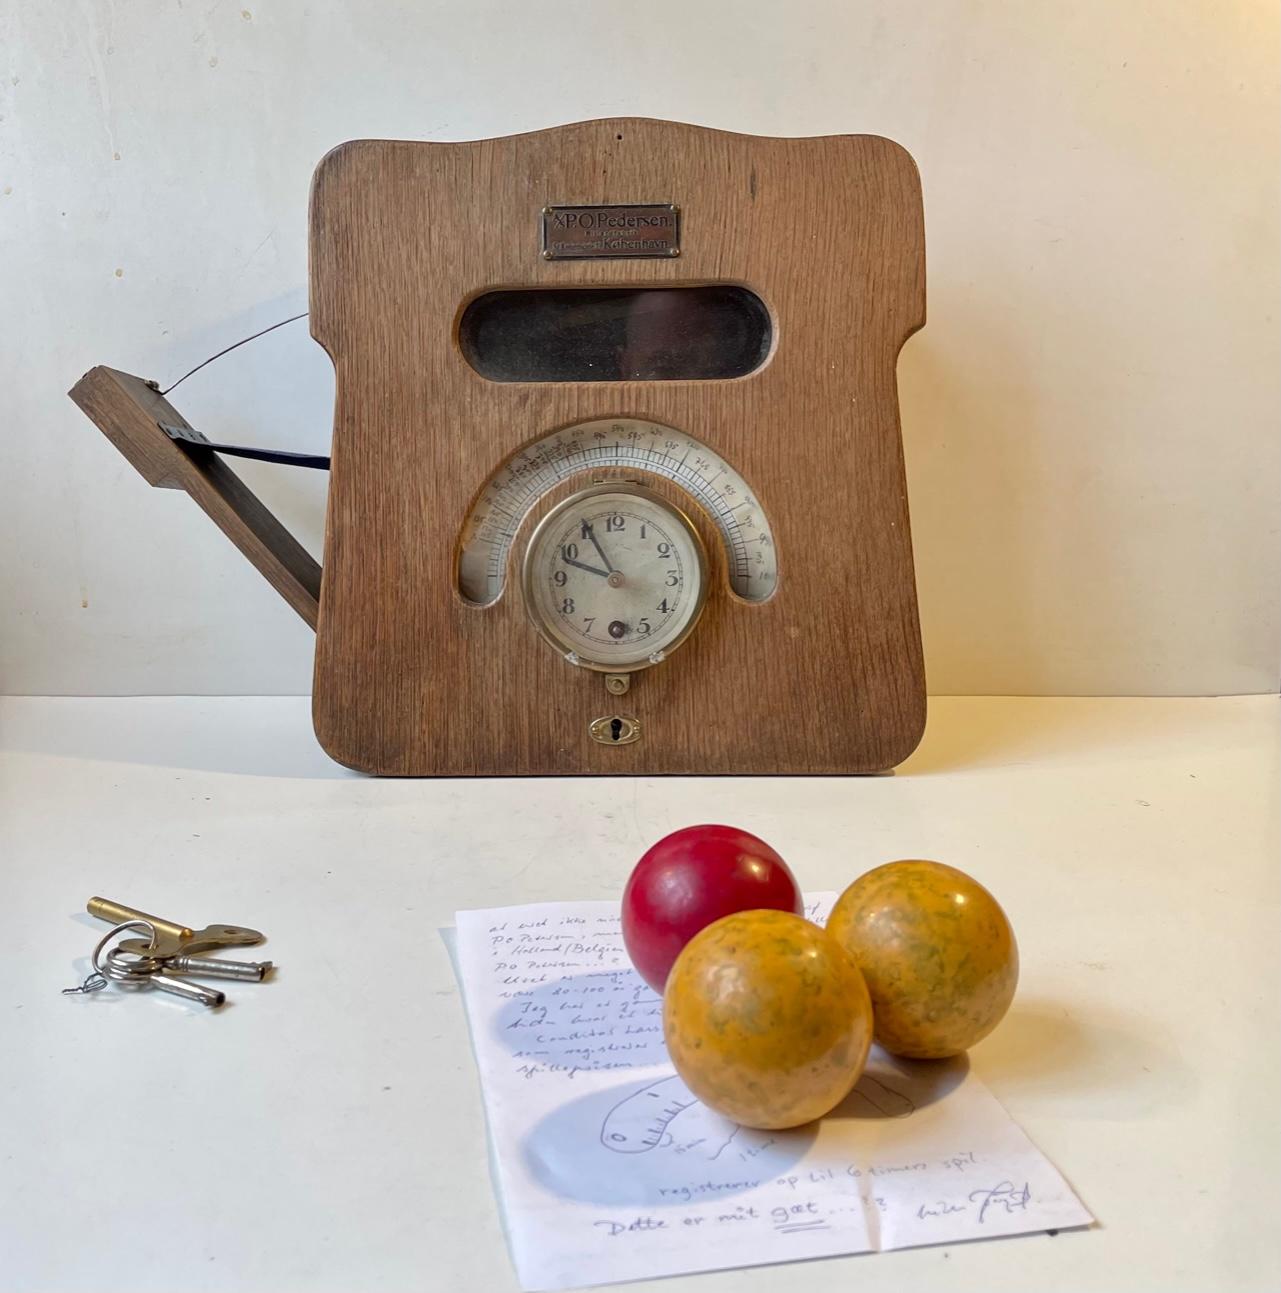 Museum's piece: mechanical clock for 3-cushions billiard. Its is made from oak that has patinated beautiful over the last 100 years. This is how is works. When you remove the 3 billiard balls from their designated key-locked compartment the time